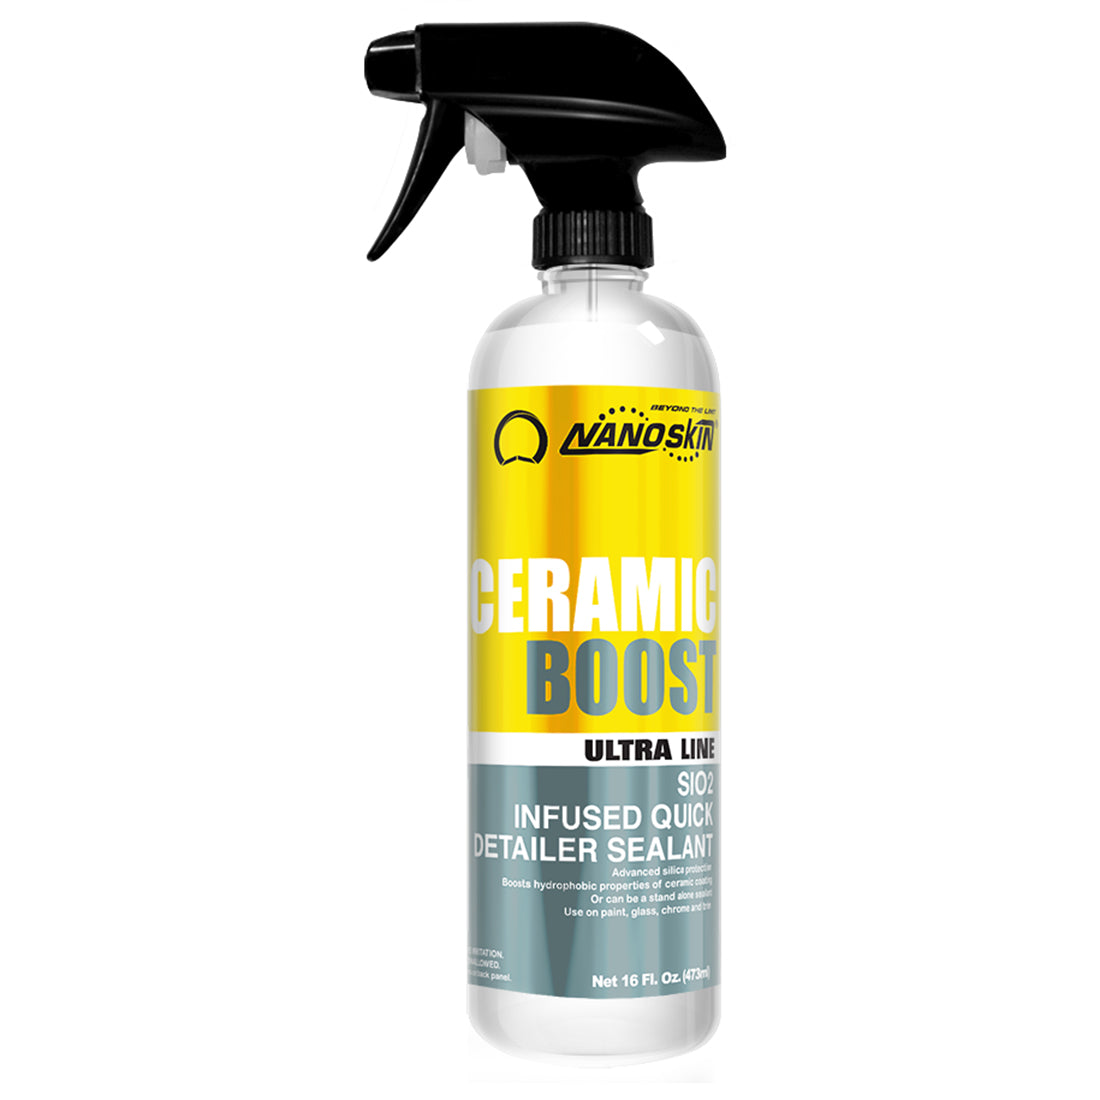 • Advanced ceramic Si02 silica protection <br>• Rejuvinates and boosts hydrophobic properties of ceramic coating <br>• Can be used on coated surfaces or as a stand alone on non coated surfaces <br>• Use on paint, glass, chrome and trim